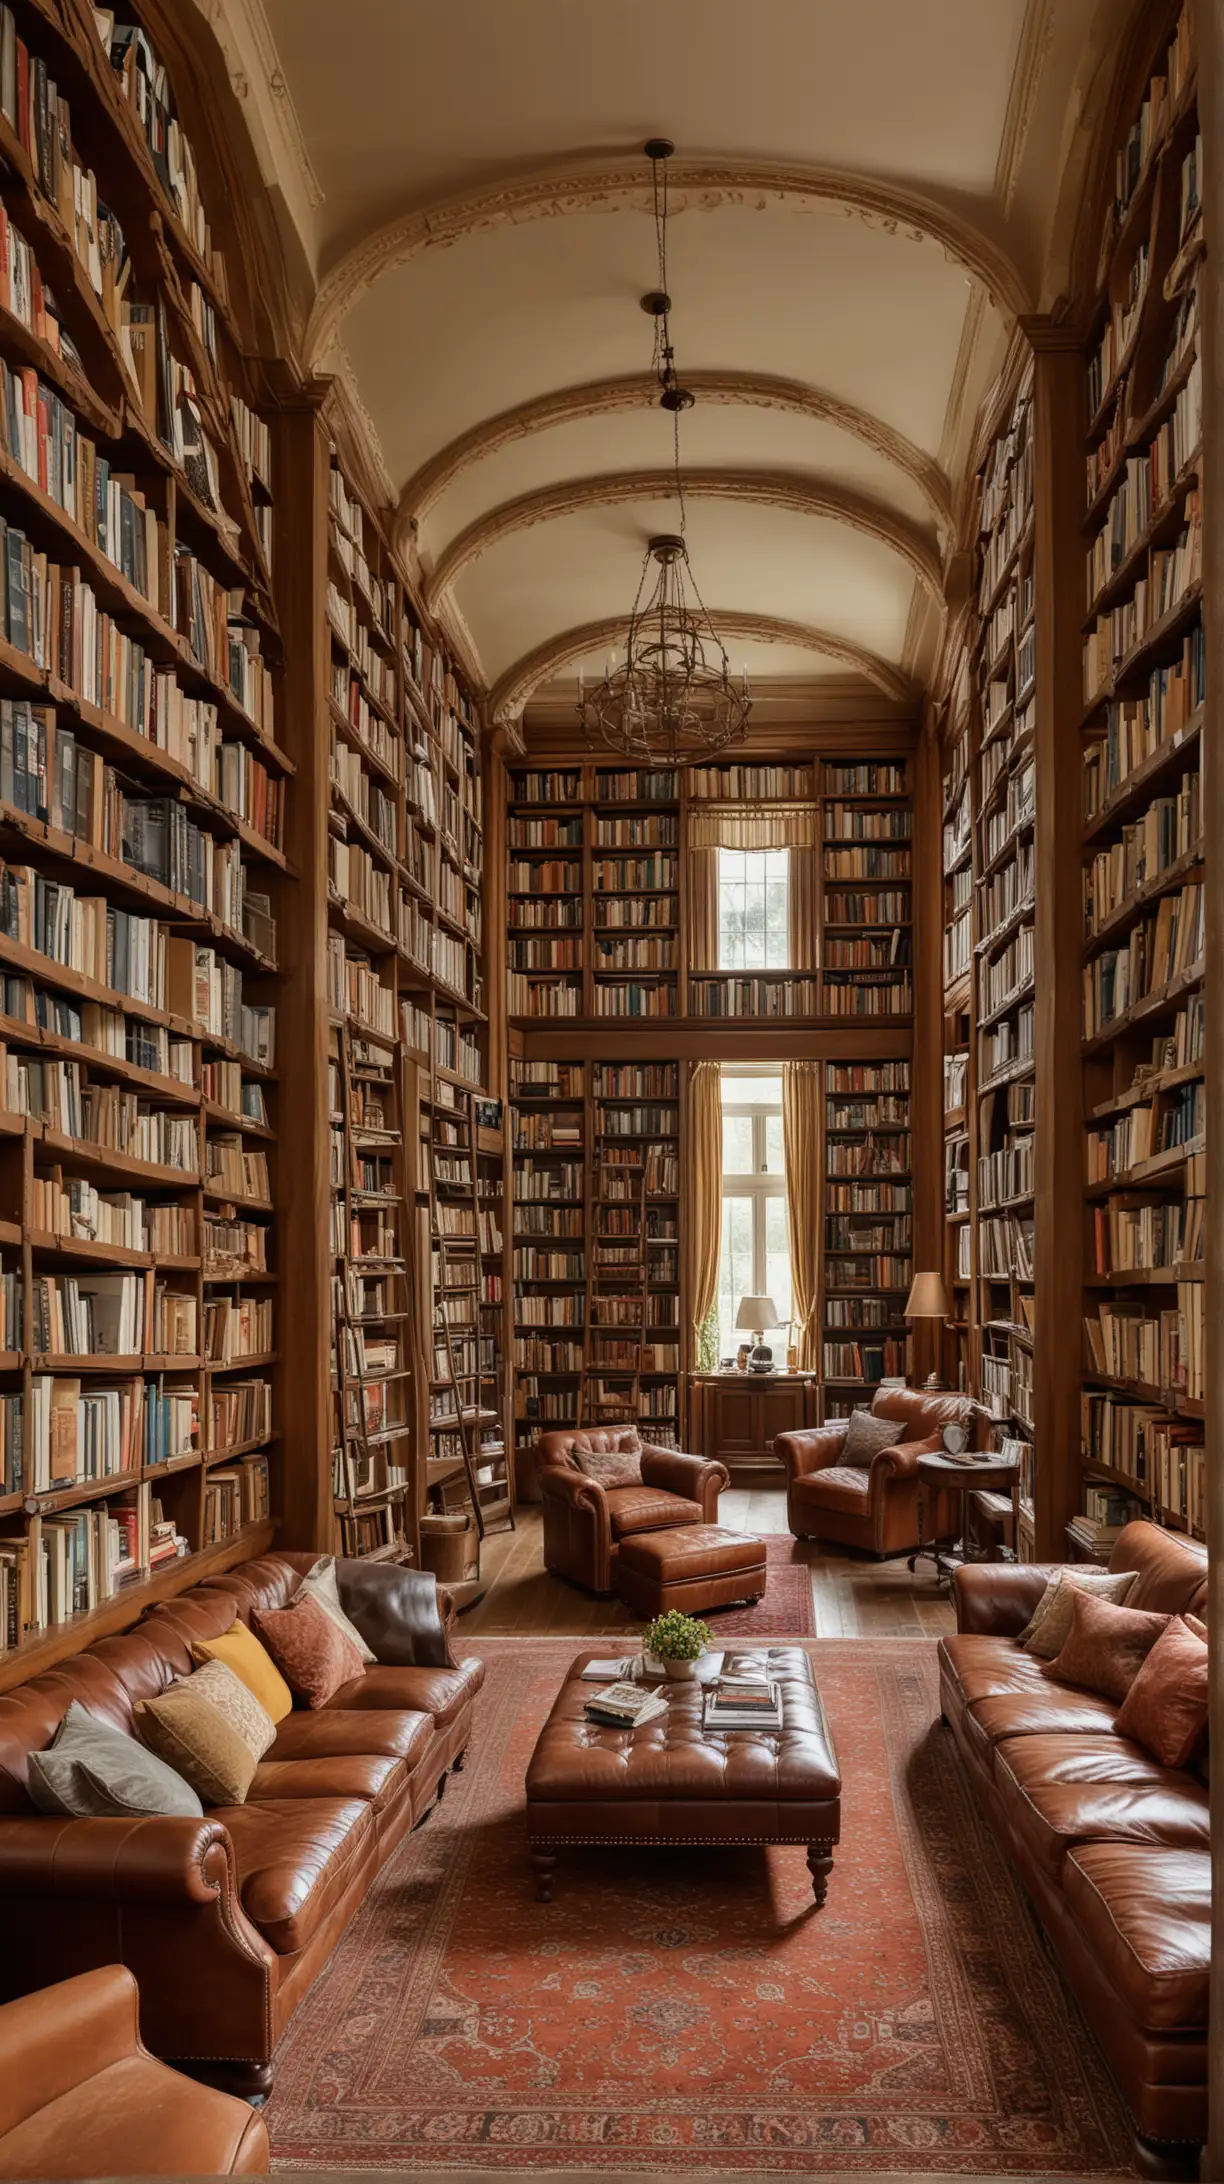 Traditional living room with floor-to-ceiling bookshelves packed with books, creating a library-like atmosphere, complemented by comfortable leather seating.